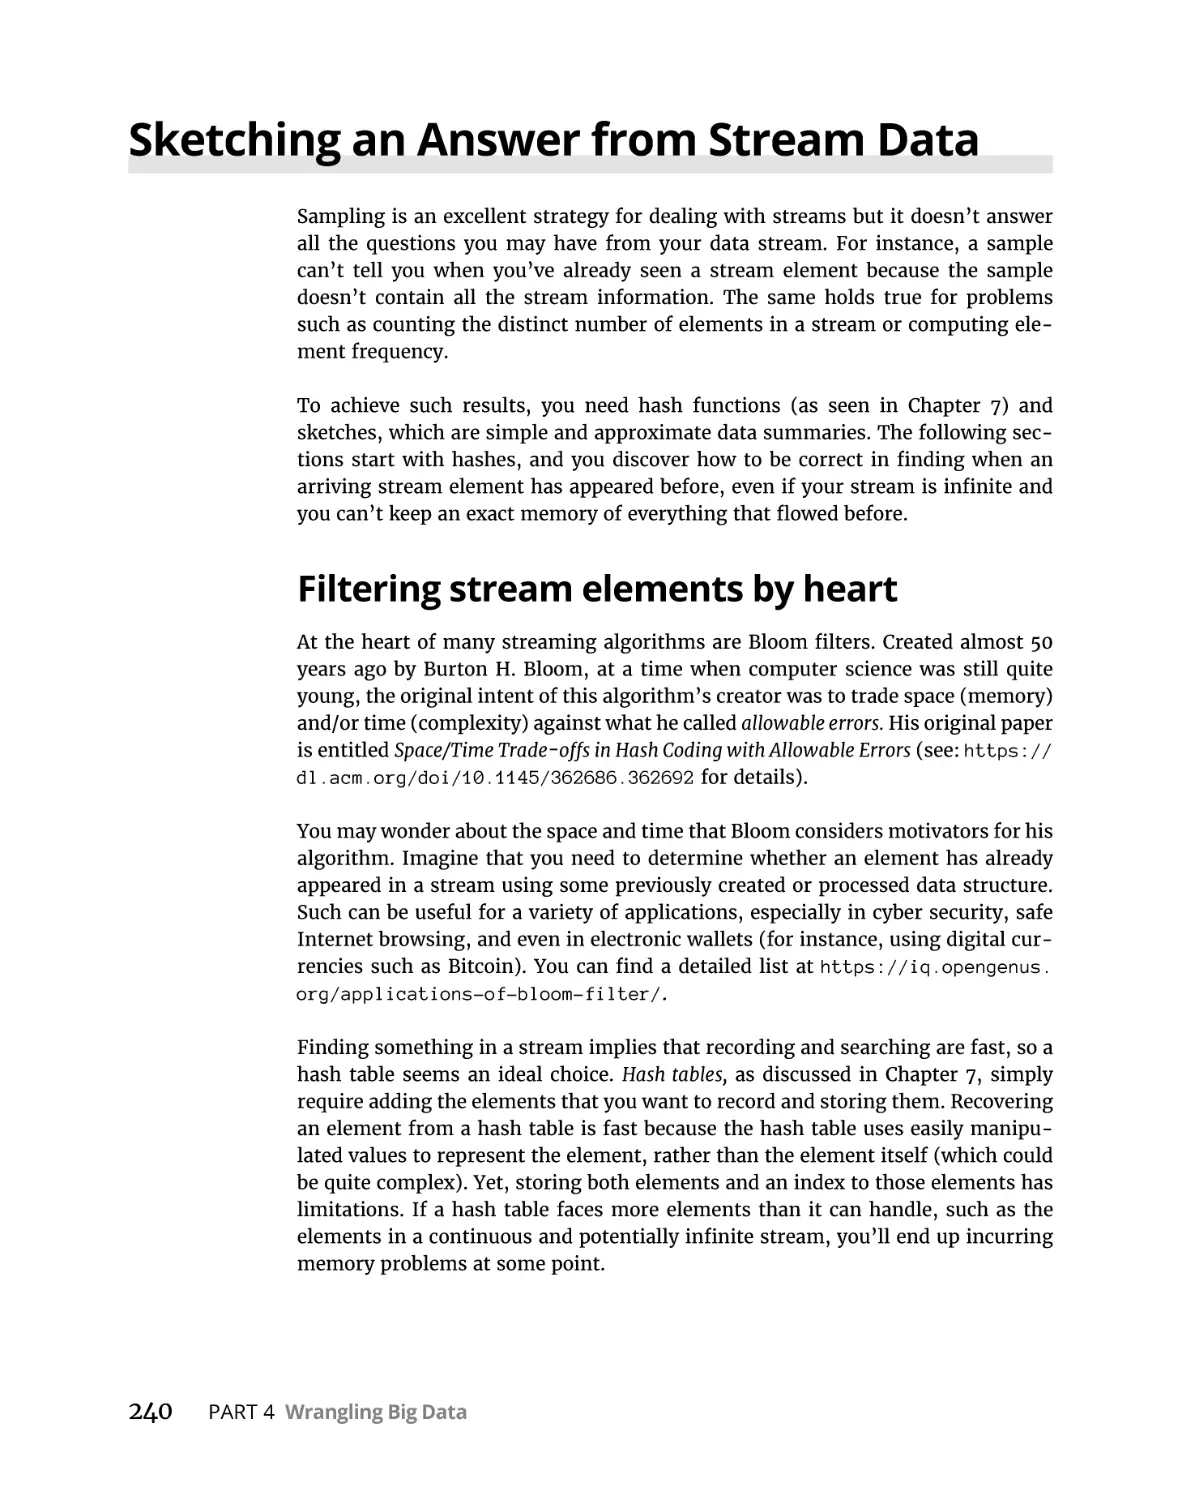 Sketching an Answer from Stream Data
Filtering stream elements by heart